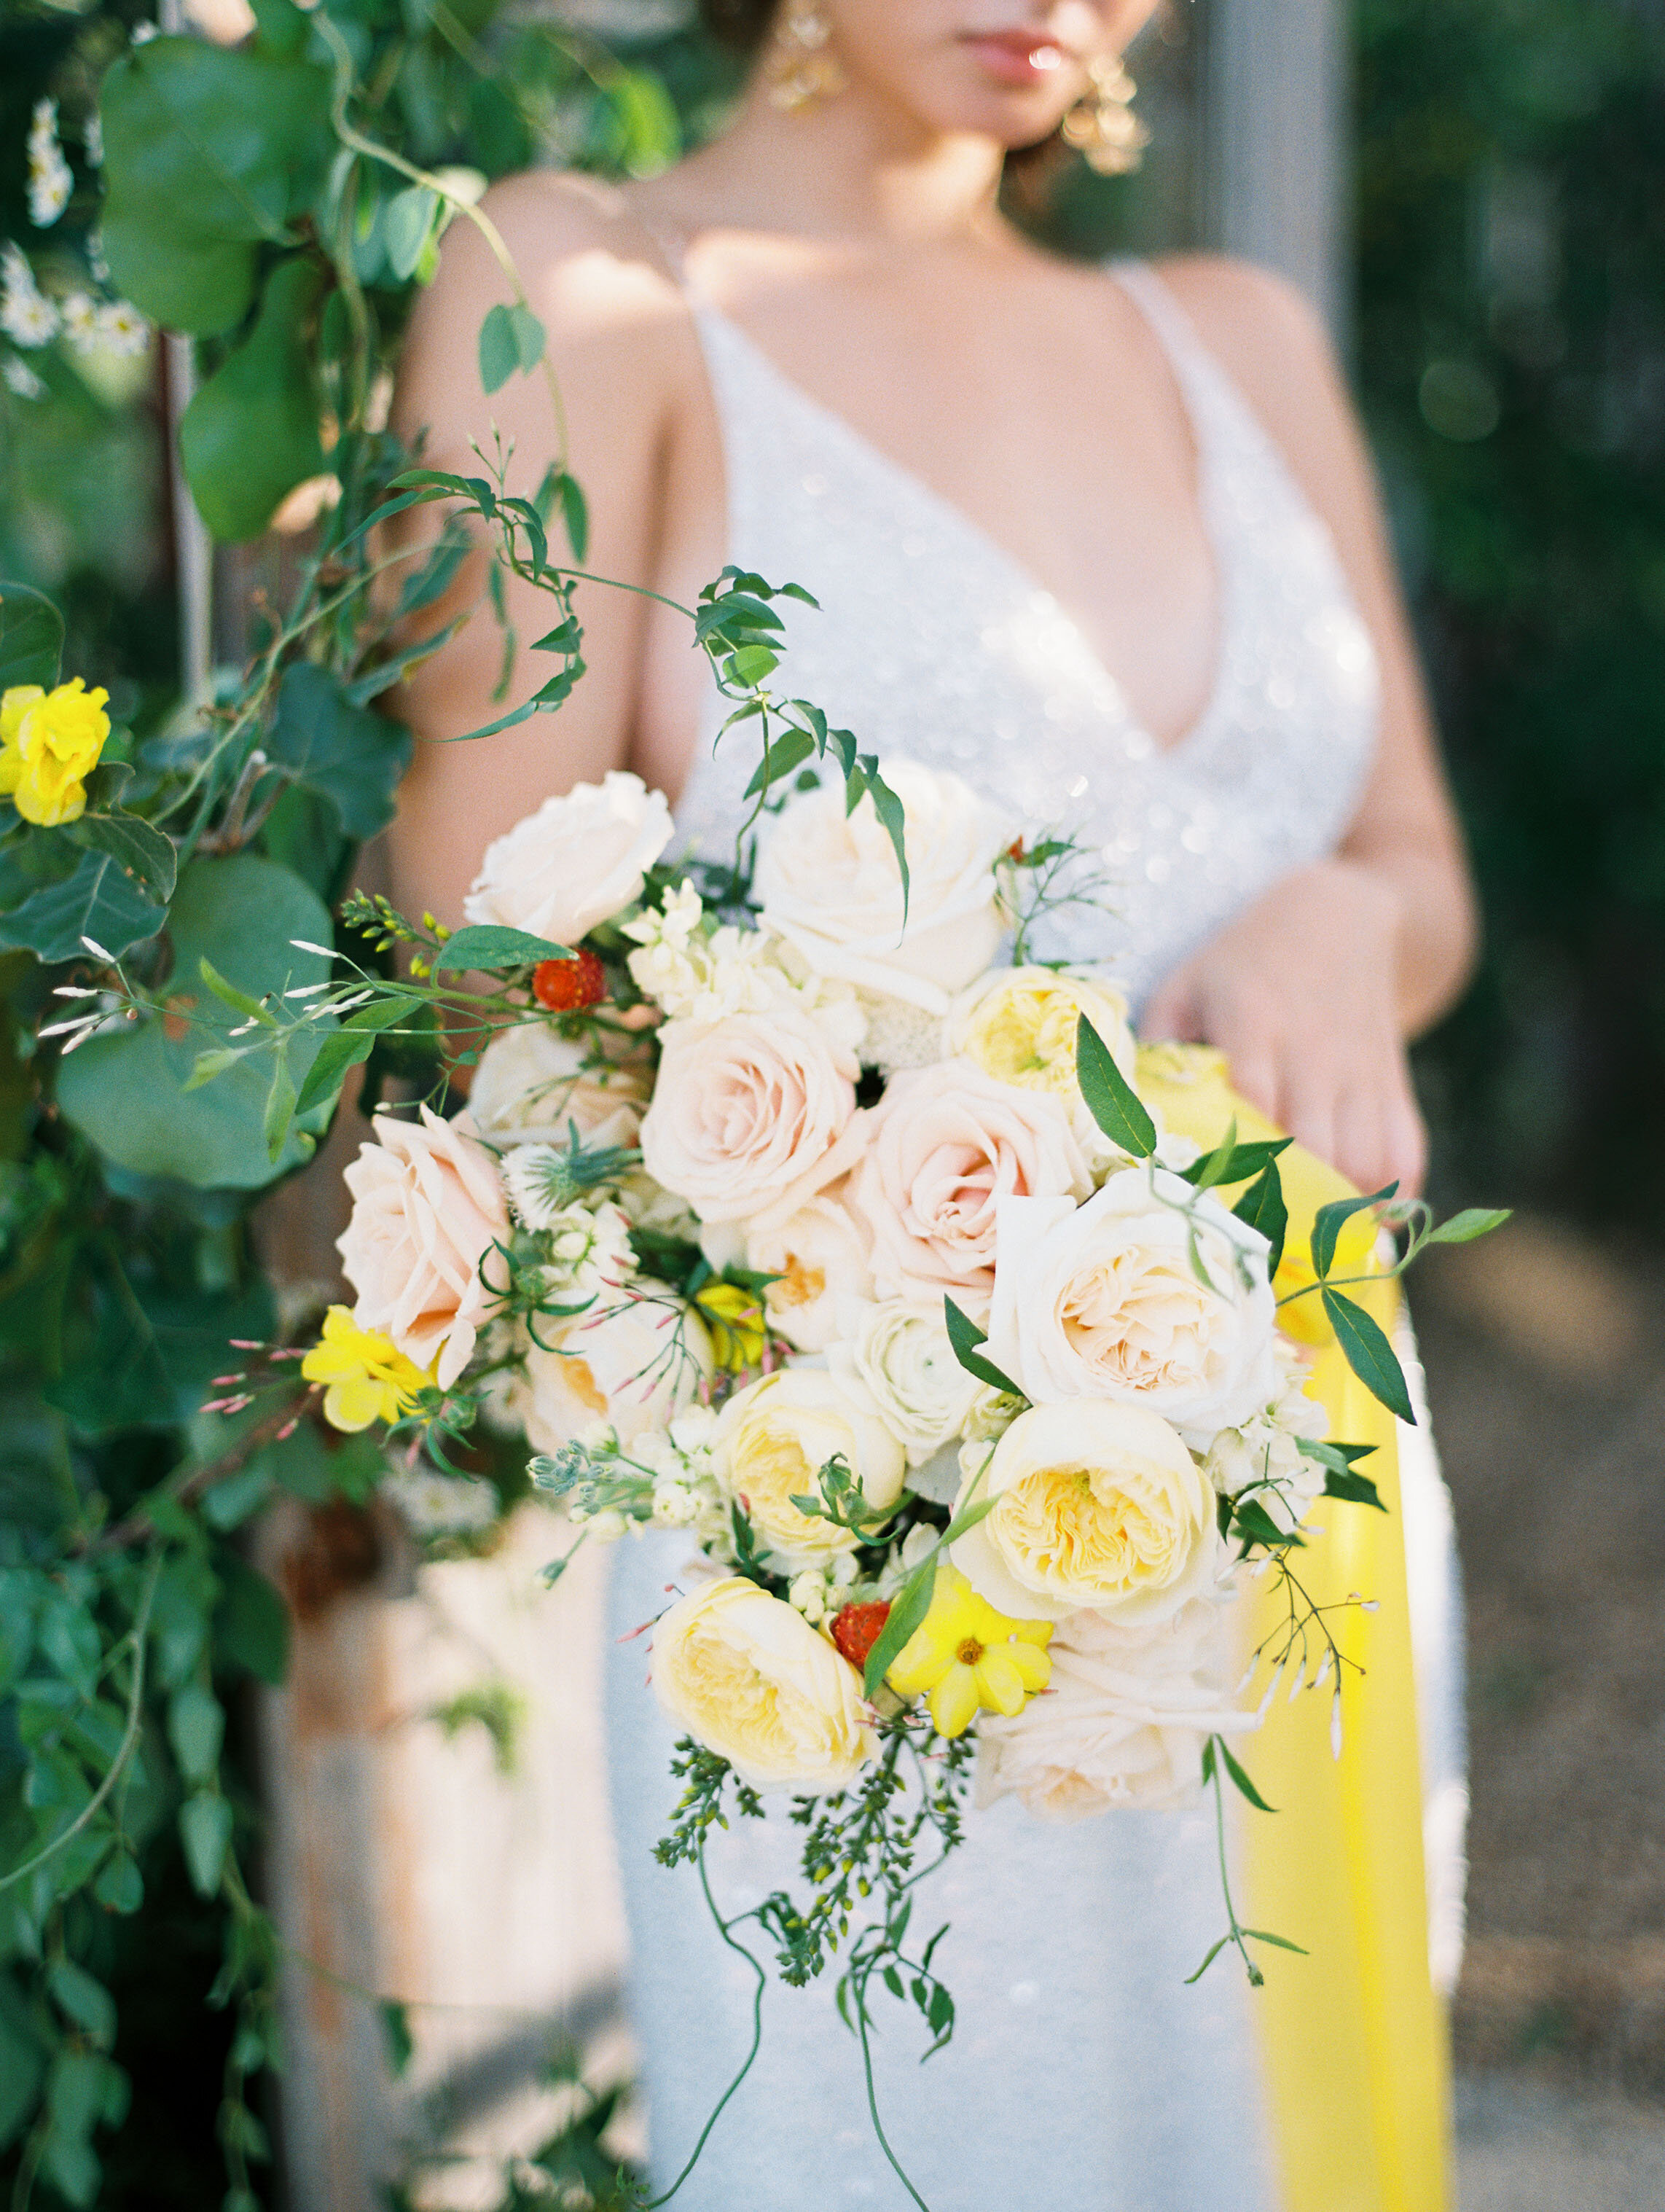  Romantic wedding inspiration in Made With Love Mila wedding gown at The White Sparrow in Texas. 